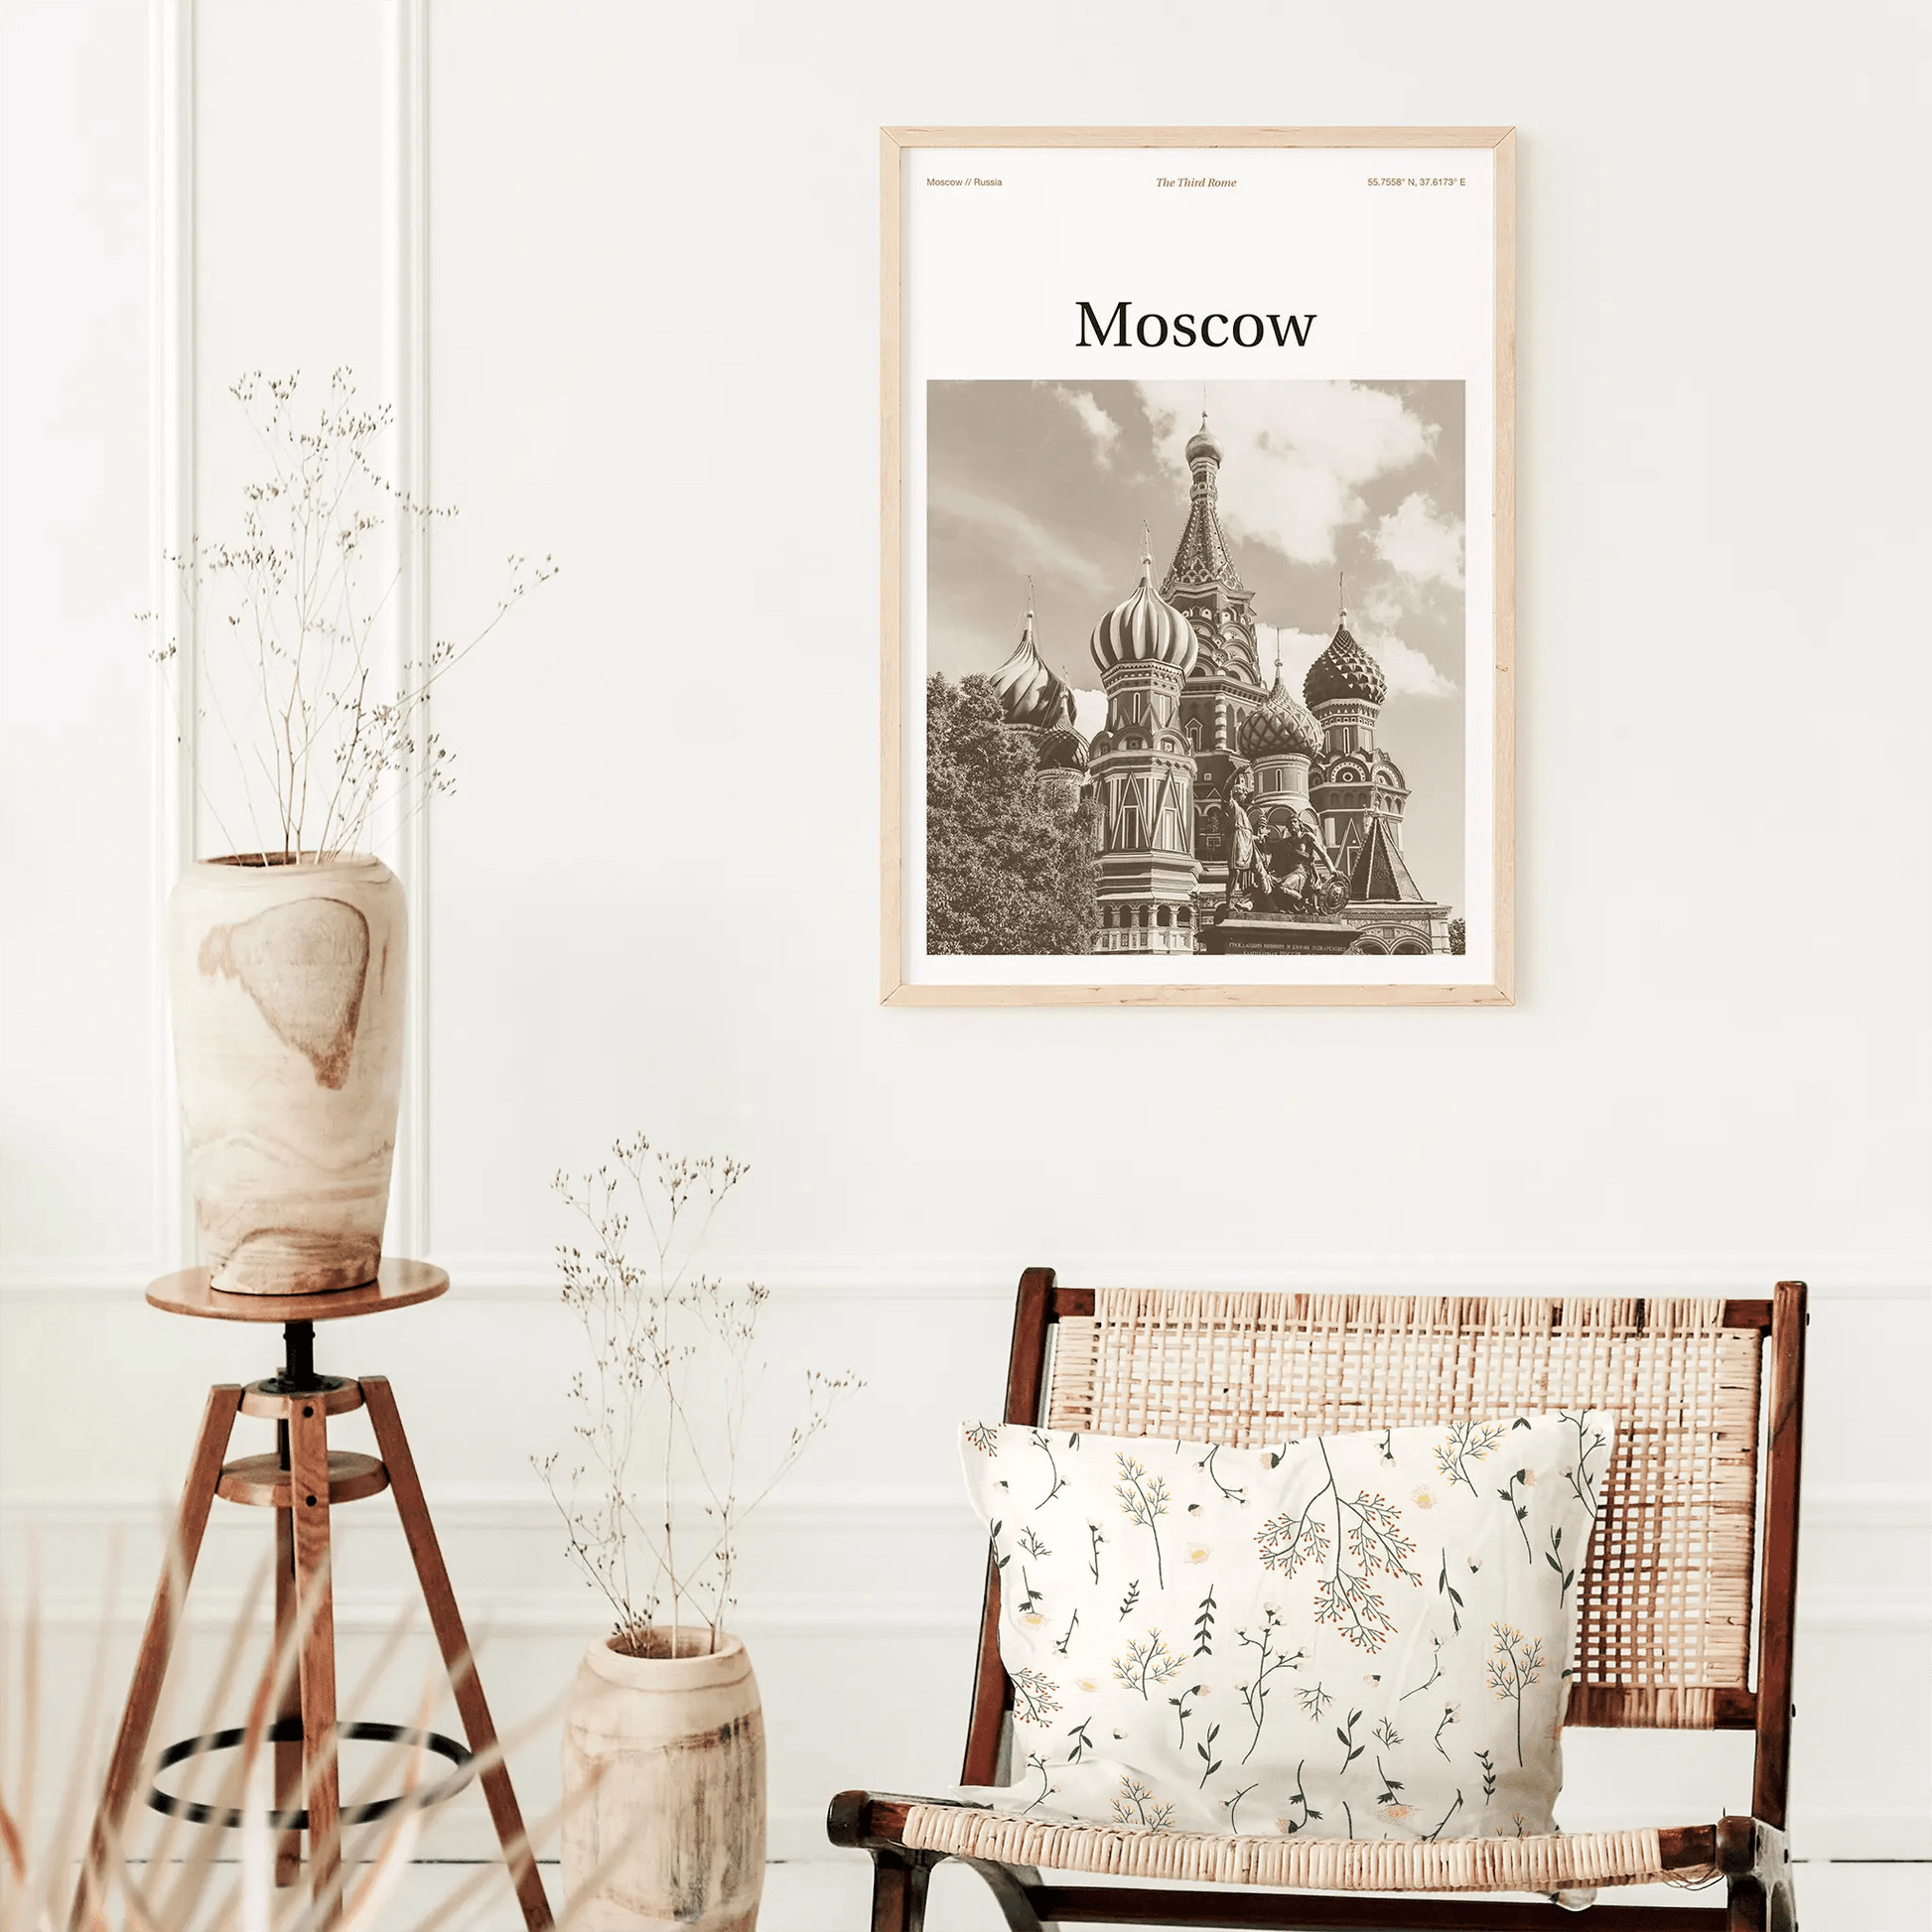 Moscow Essence Poster - The Globe Gallery